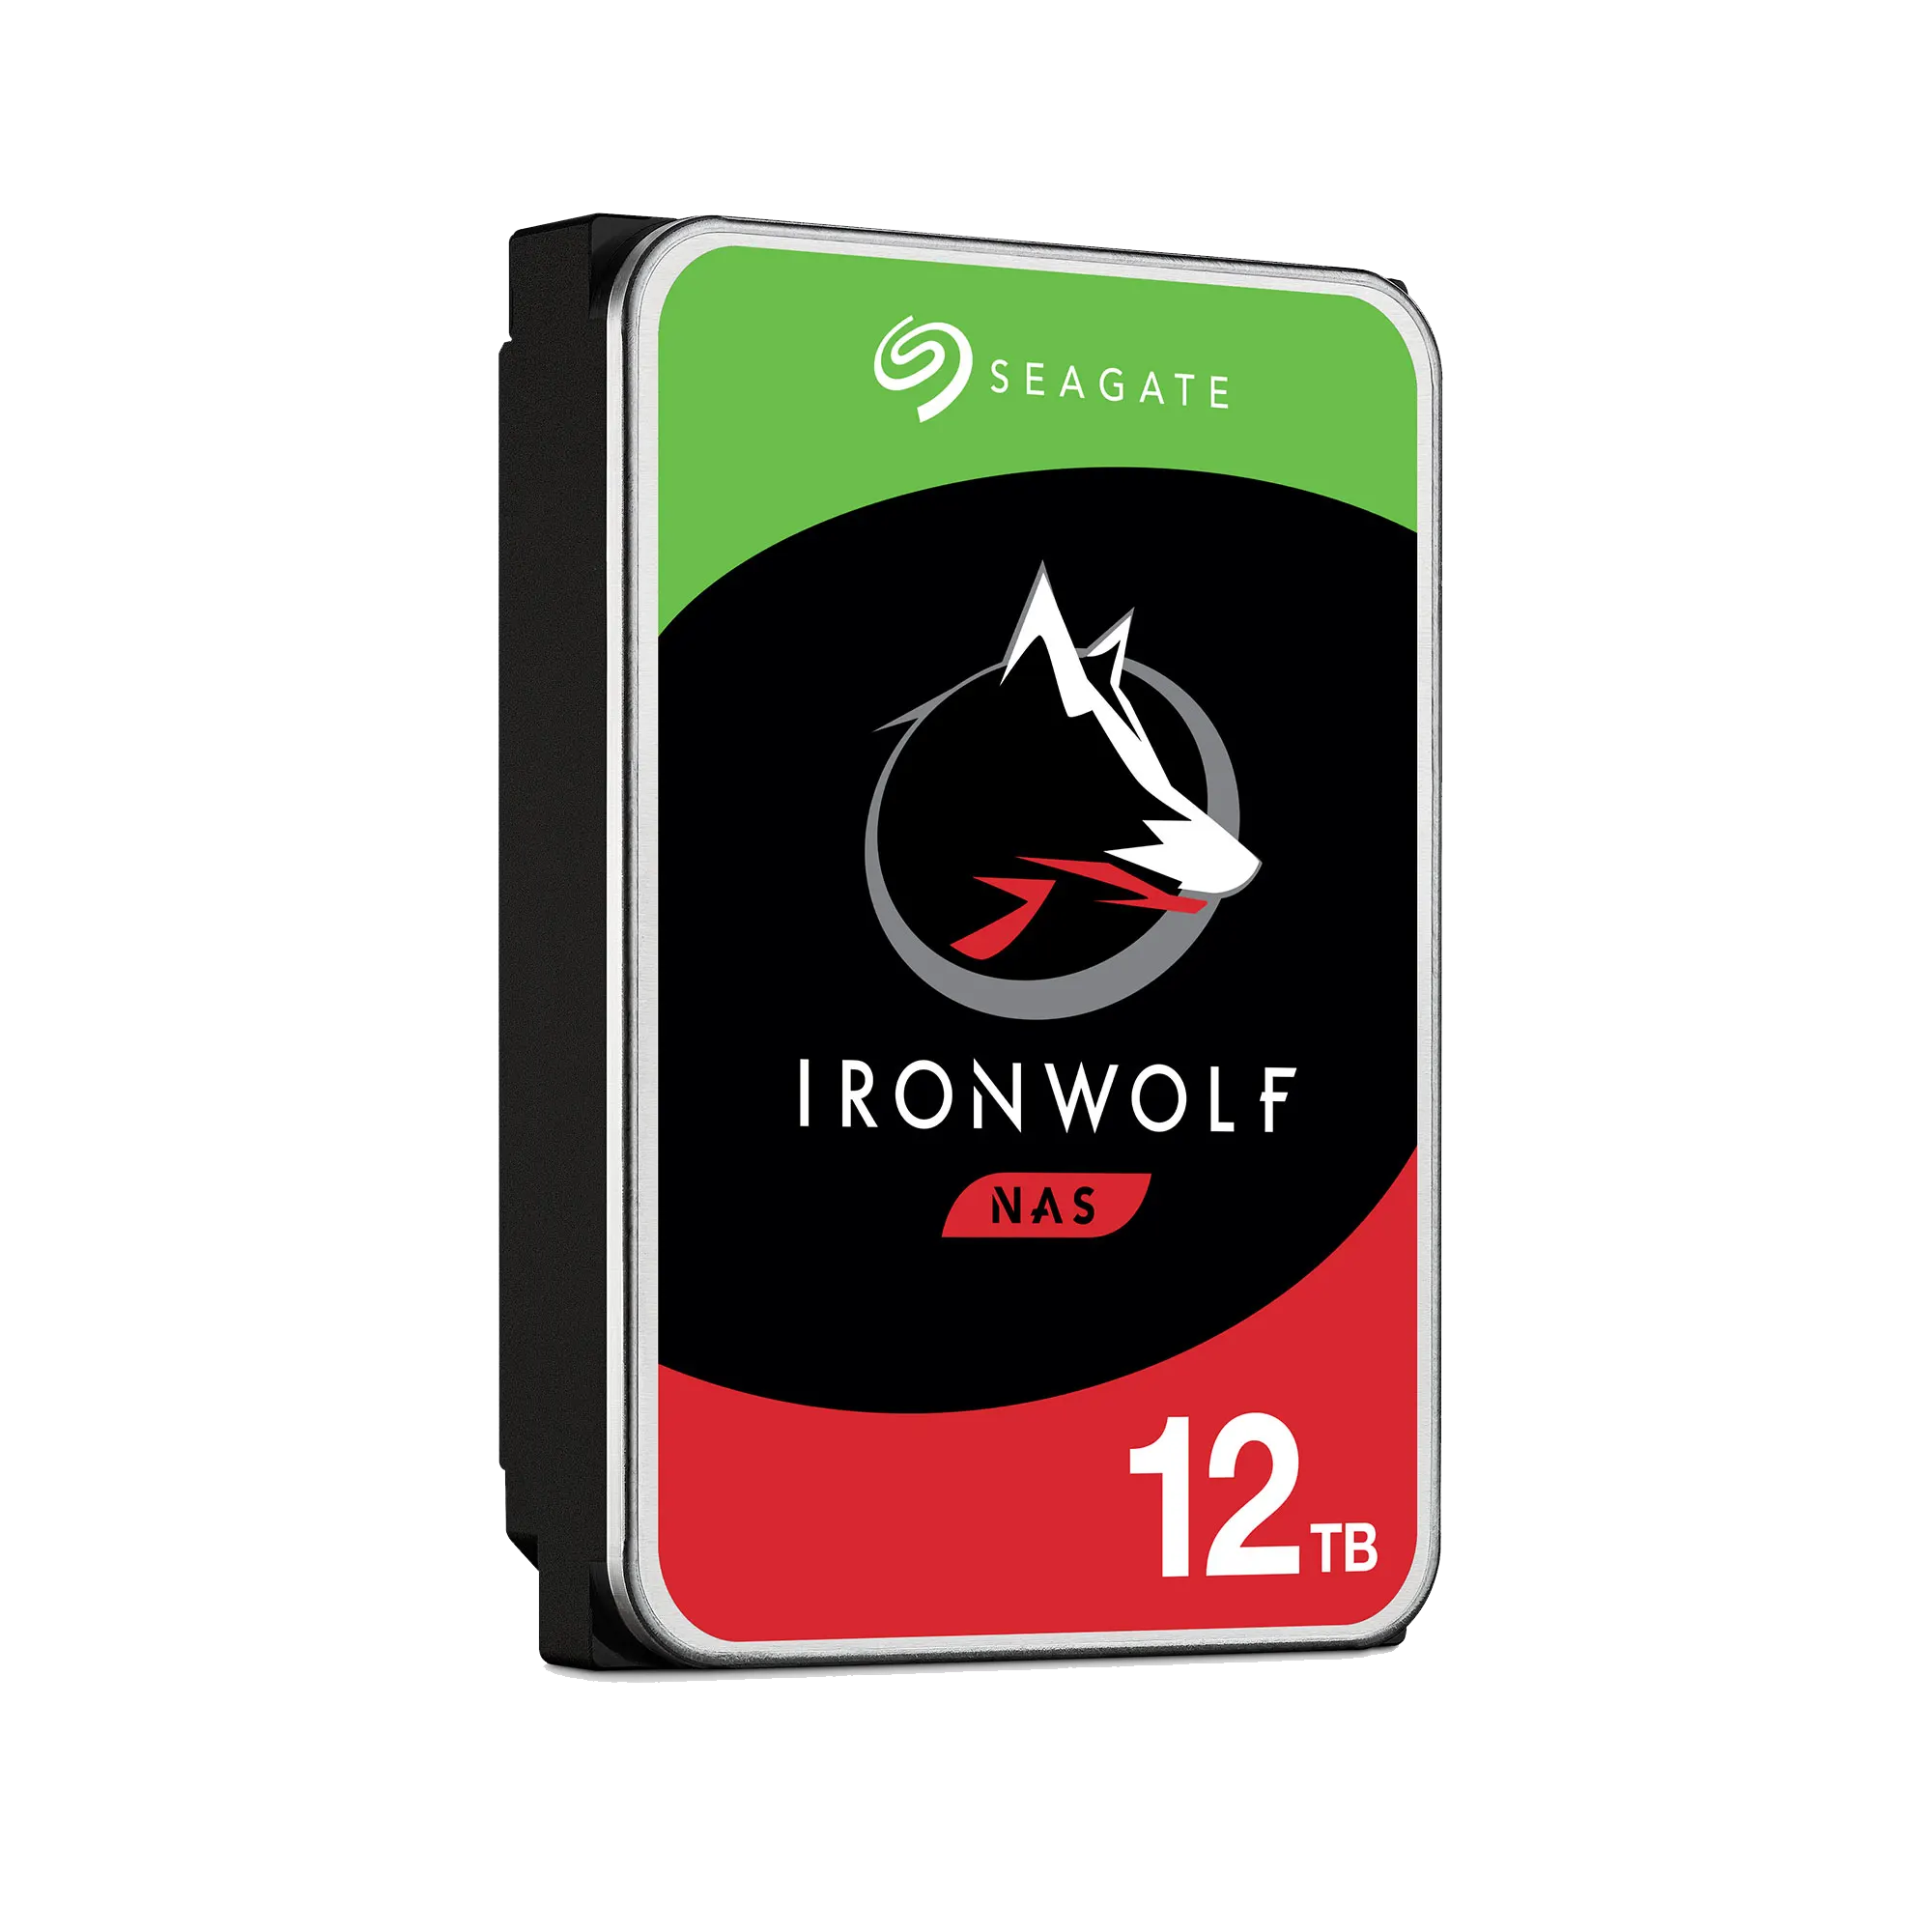 HDD Seagate IronWolf 12 TB ST120000VN0008 3.5 inch SATA III 256MB Cache 7200RPM